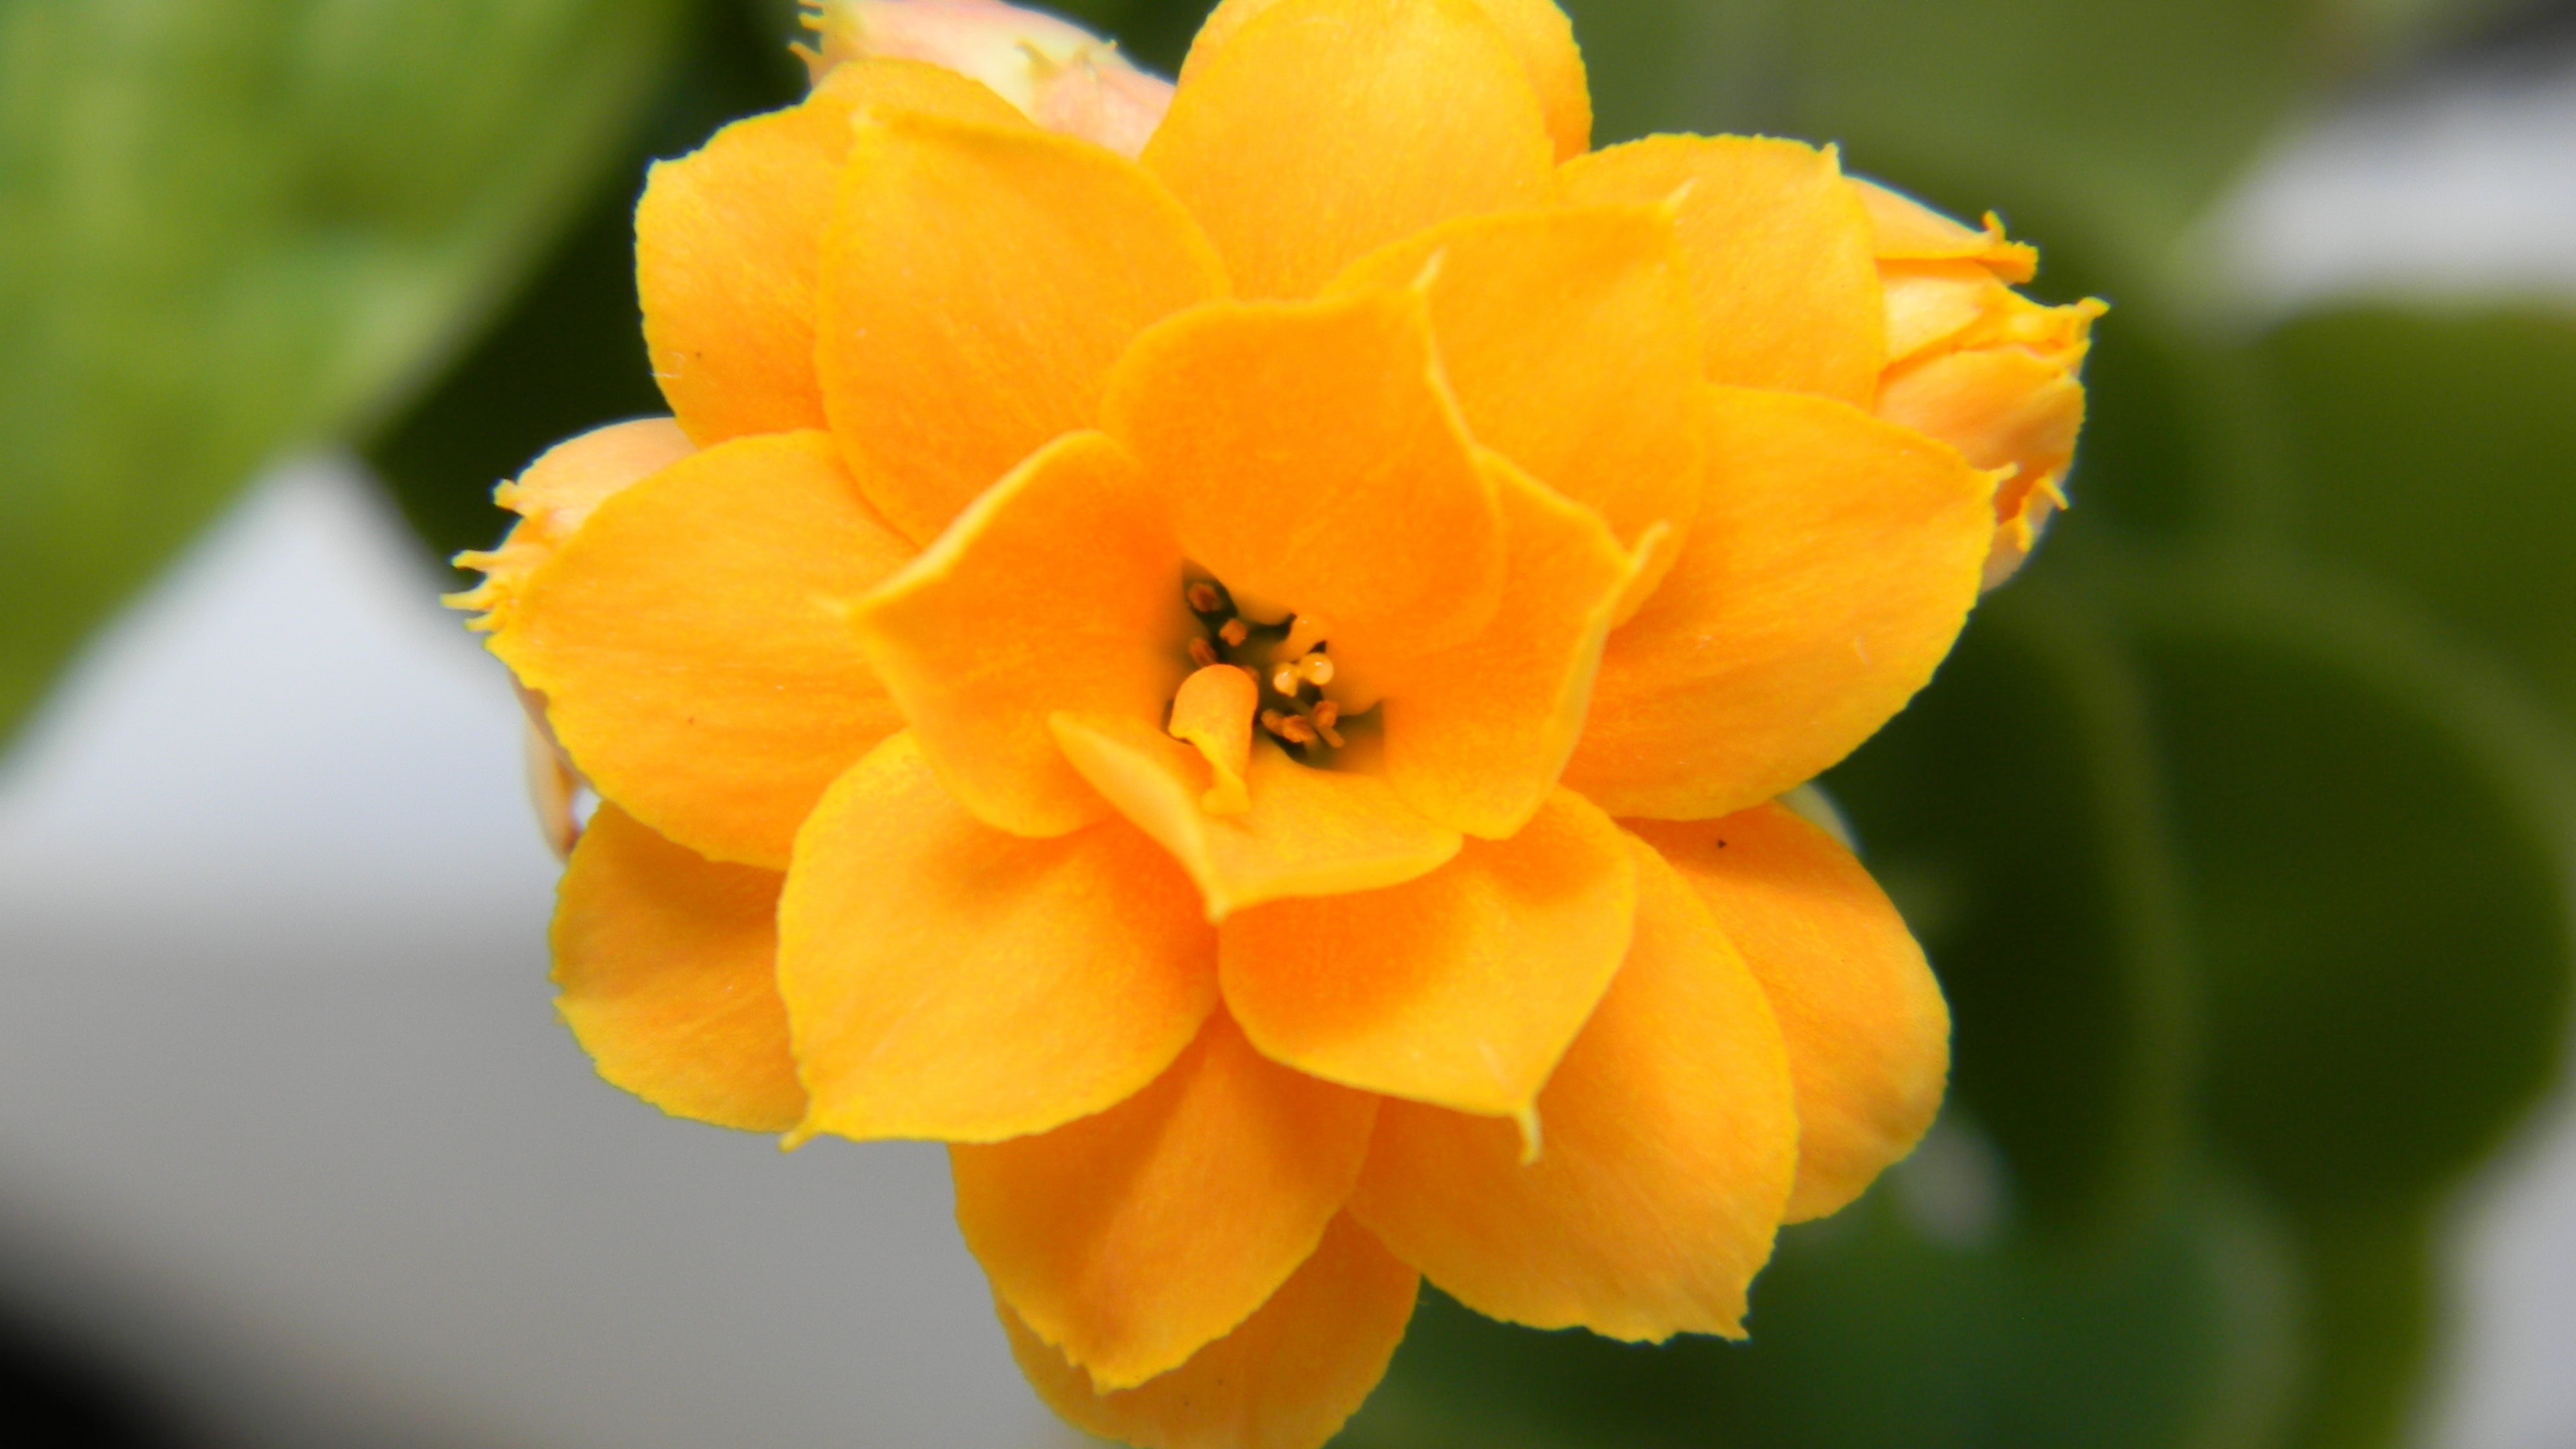 yellow flower in focus photography